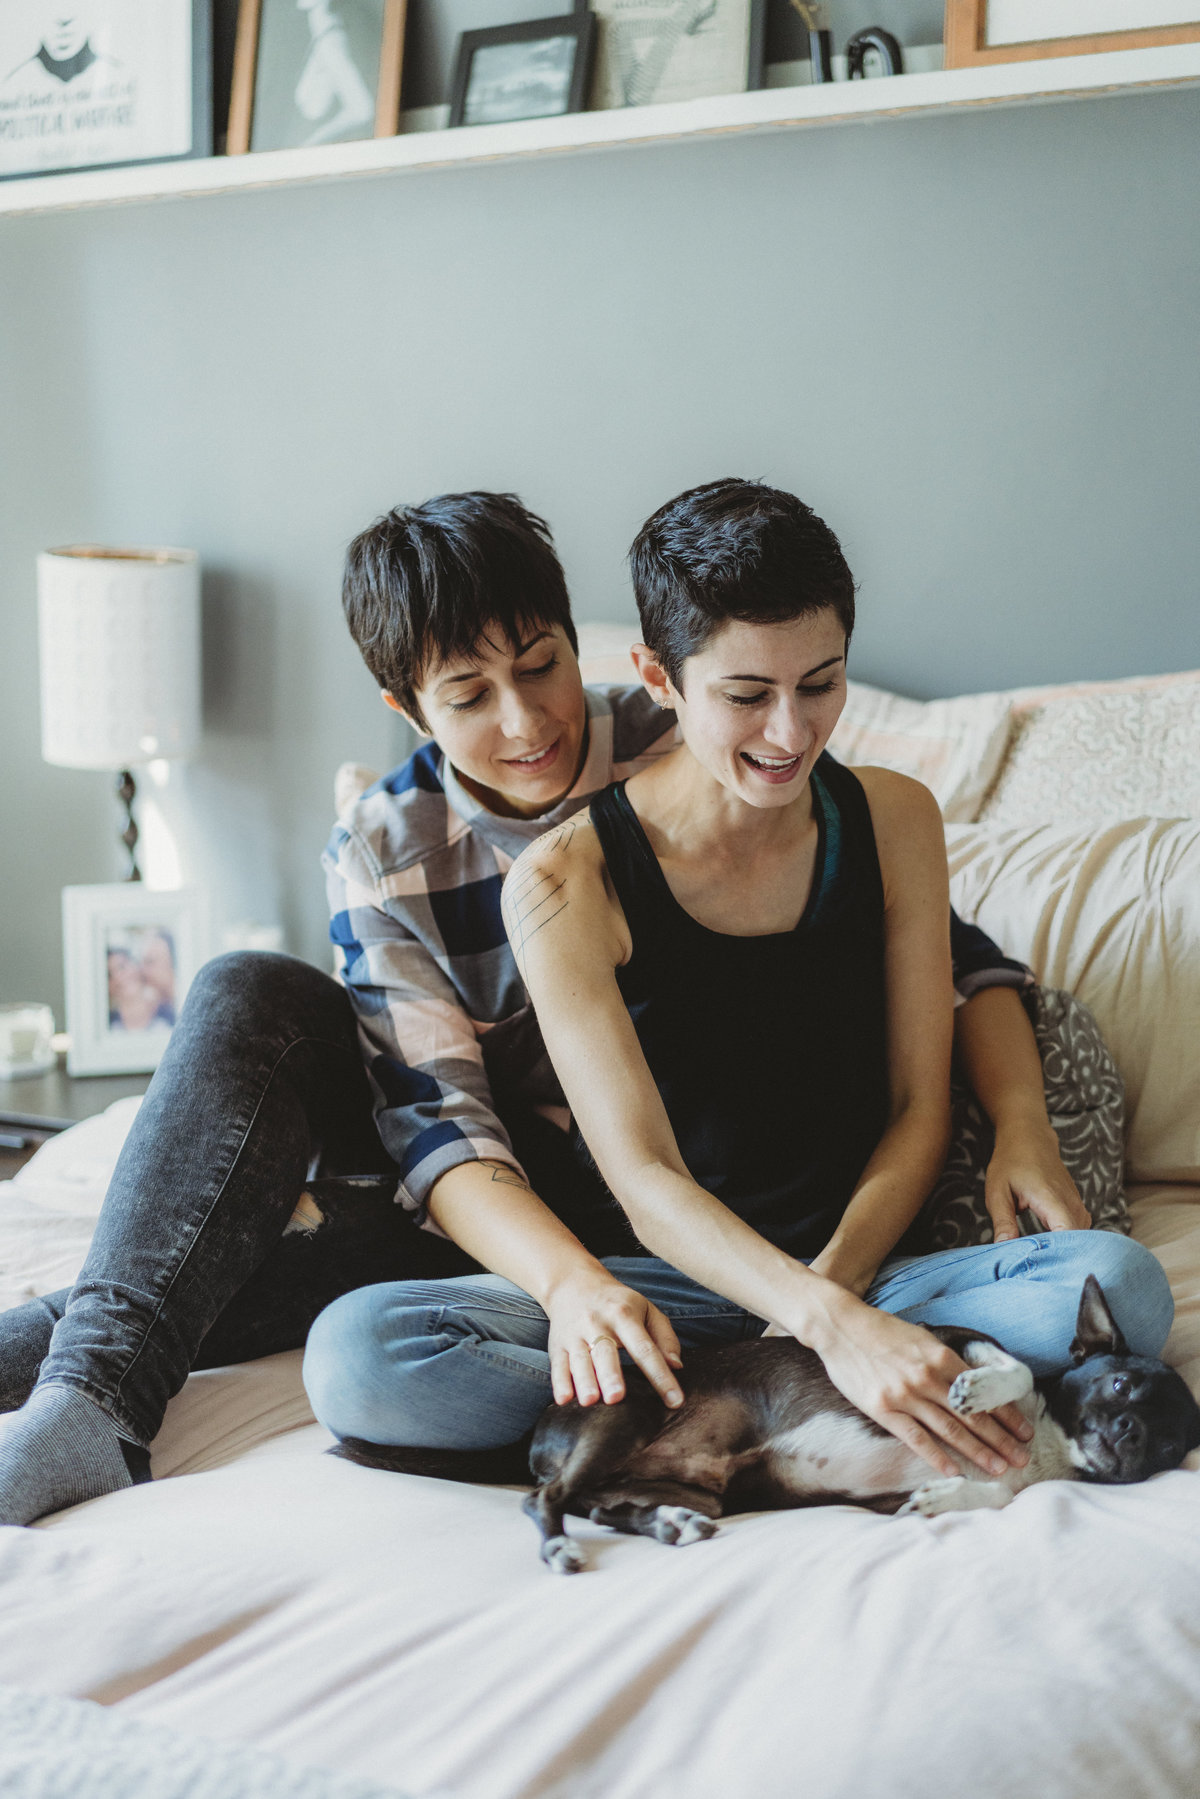 LESBIAN IN HOME COUPLES PHOTOGRAPHY SESSION